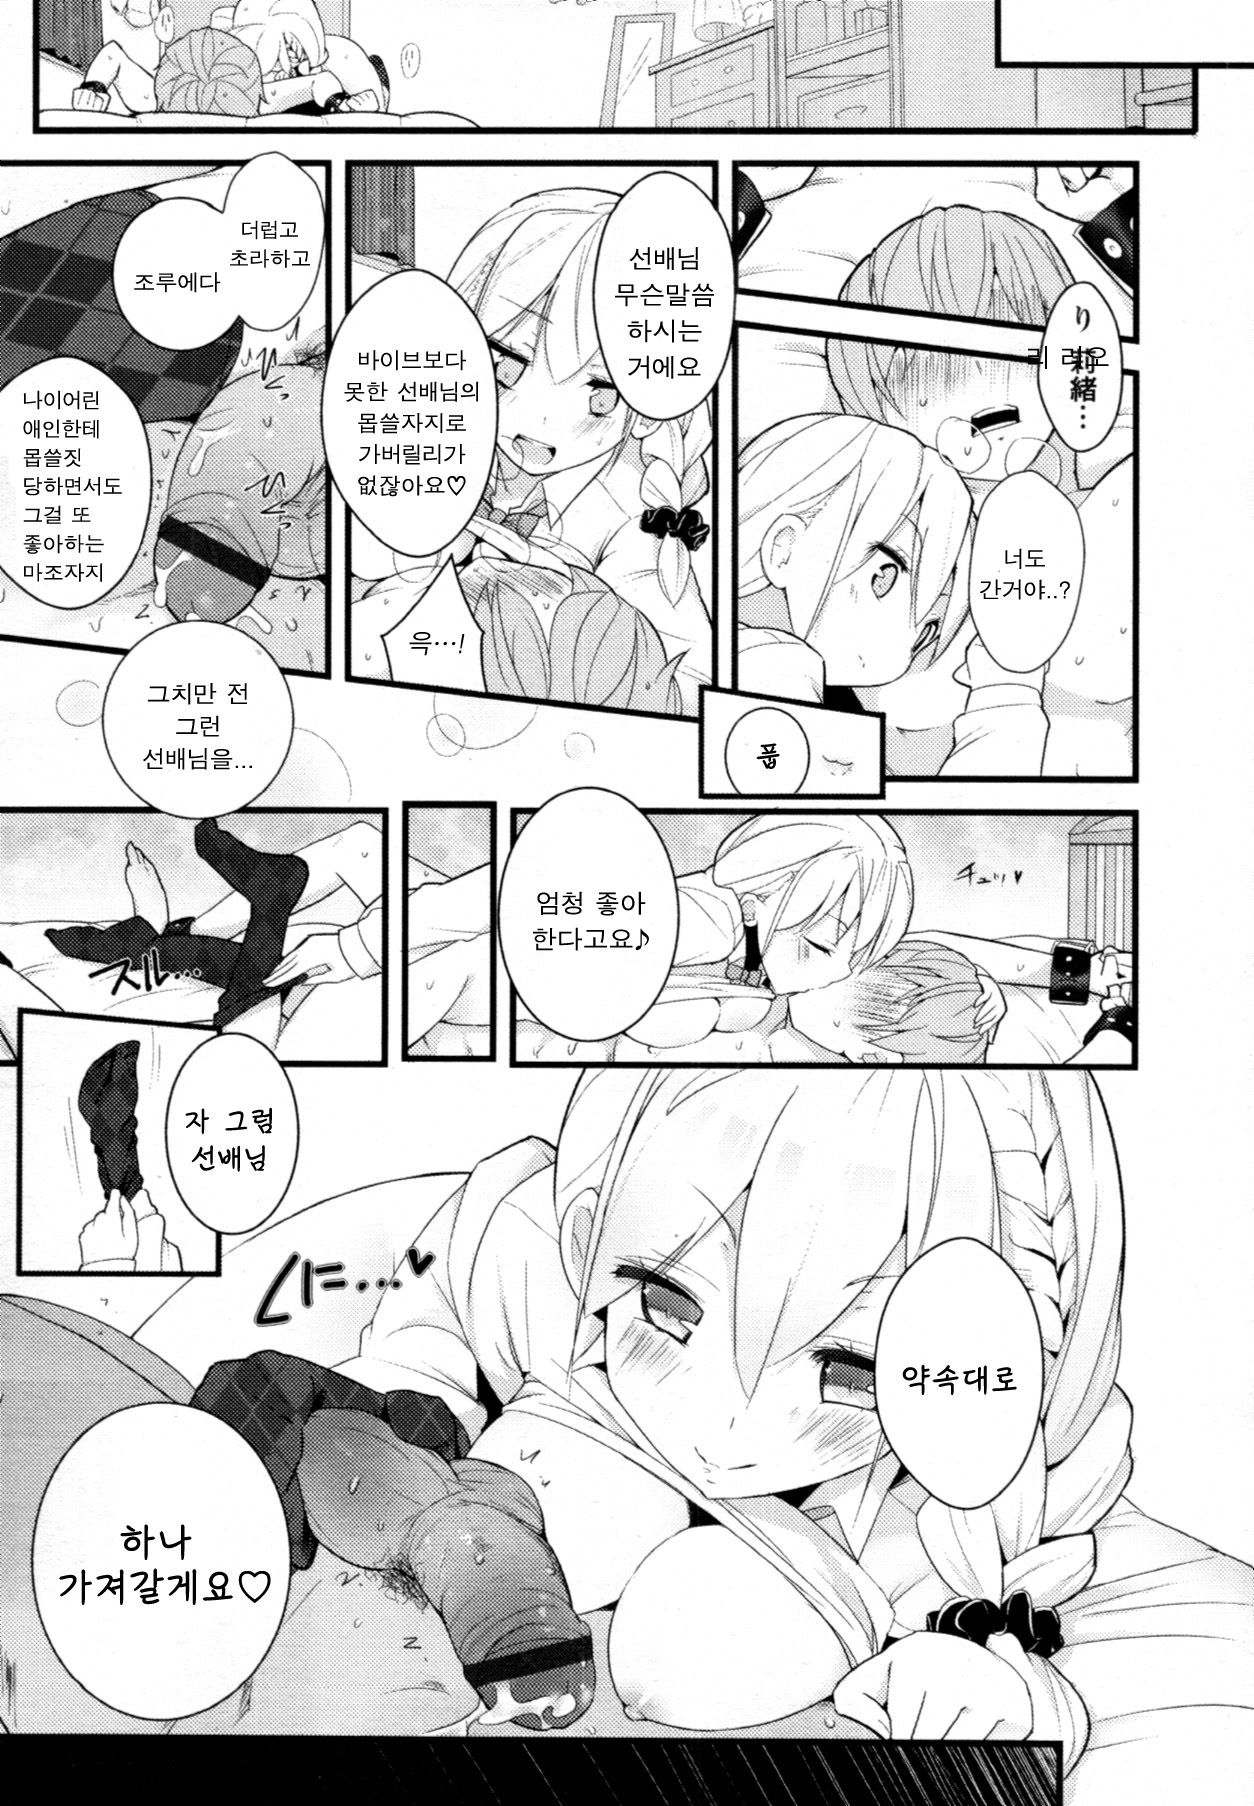 [Mame] Sex a Heel (COMIC Tenma 2011-07) [Korean] [Lily] page 23 full